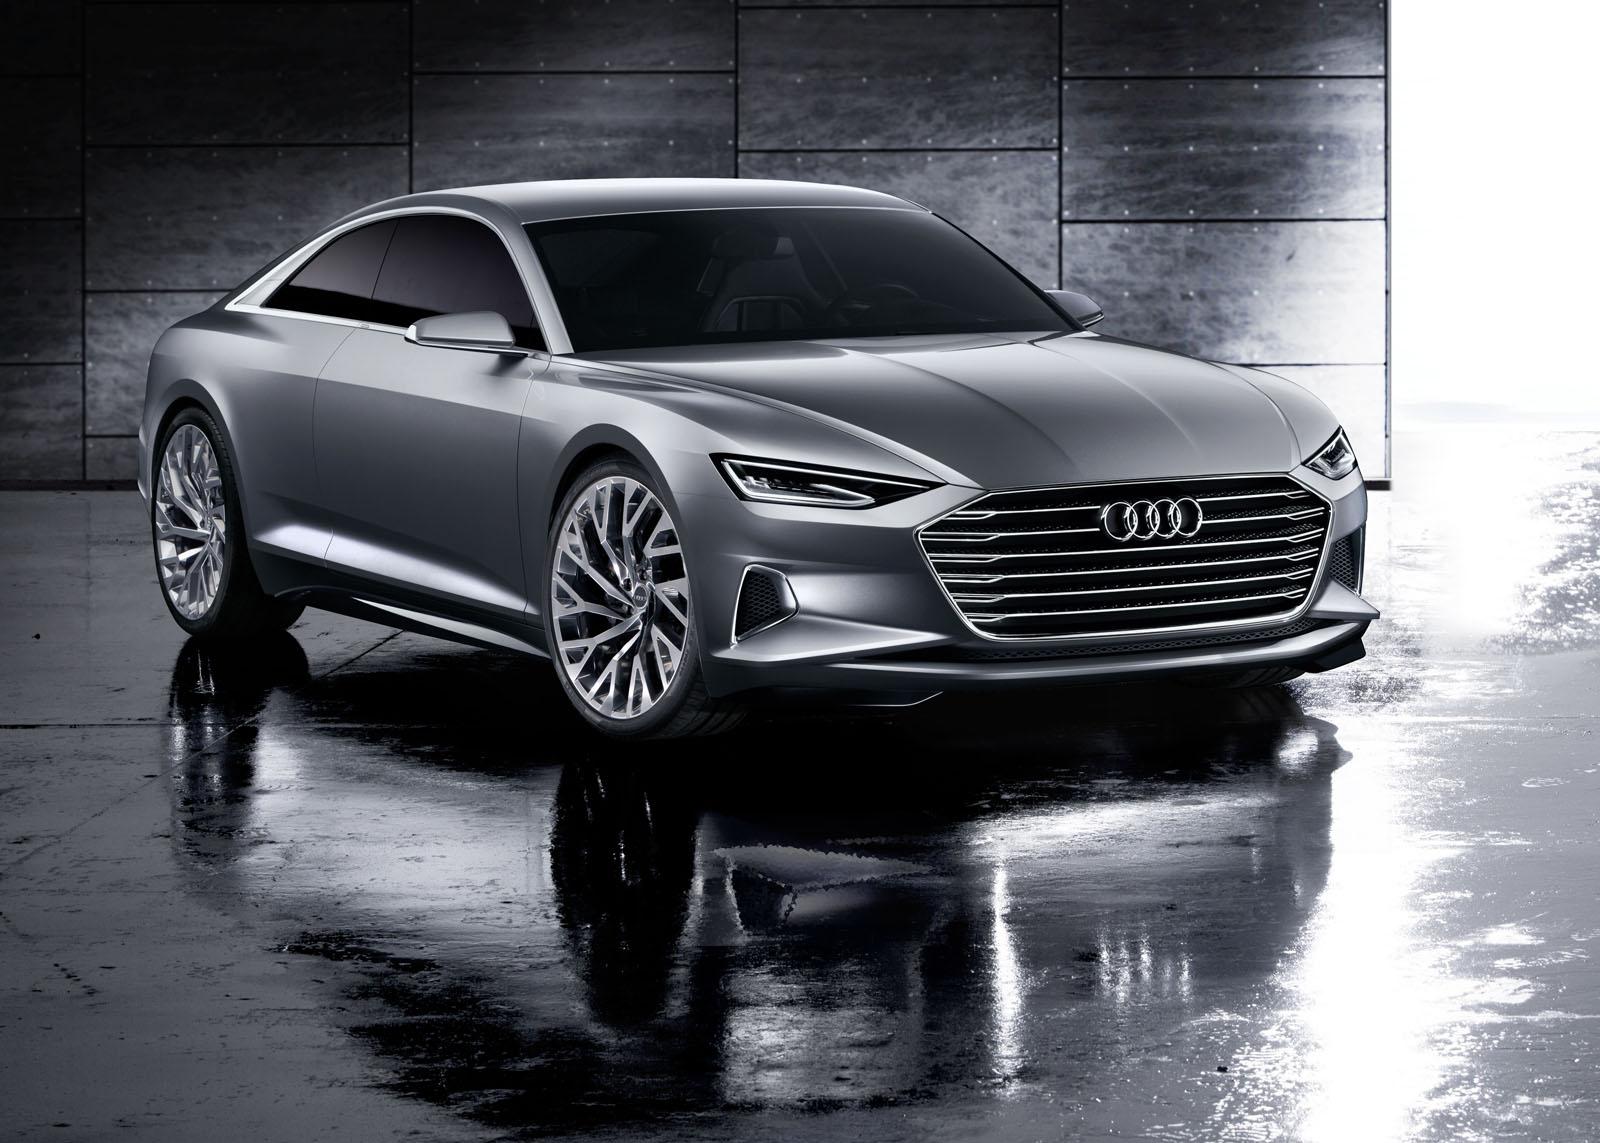 Next-generation Audi cars will be based on the Prologue concept